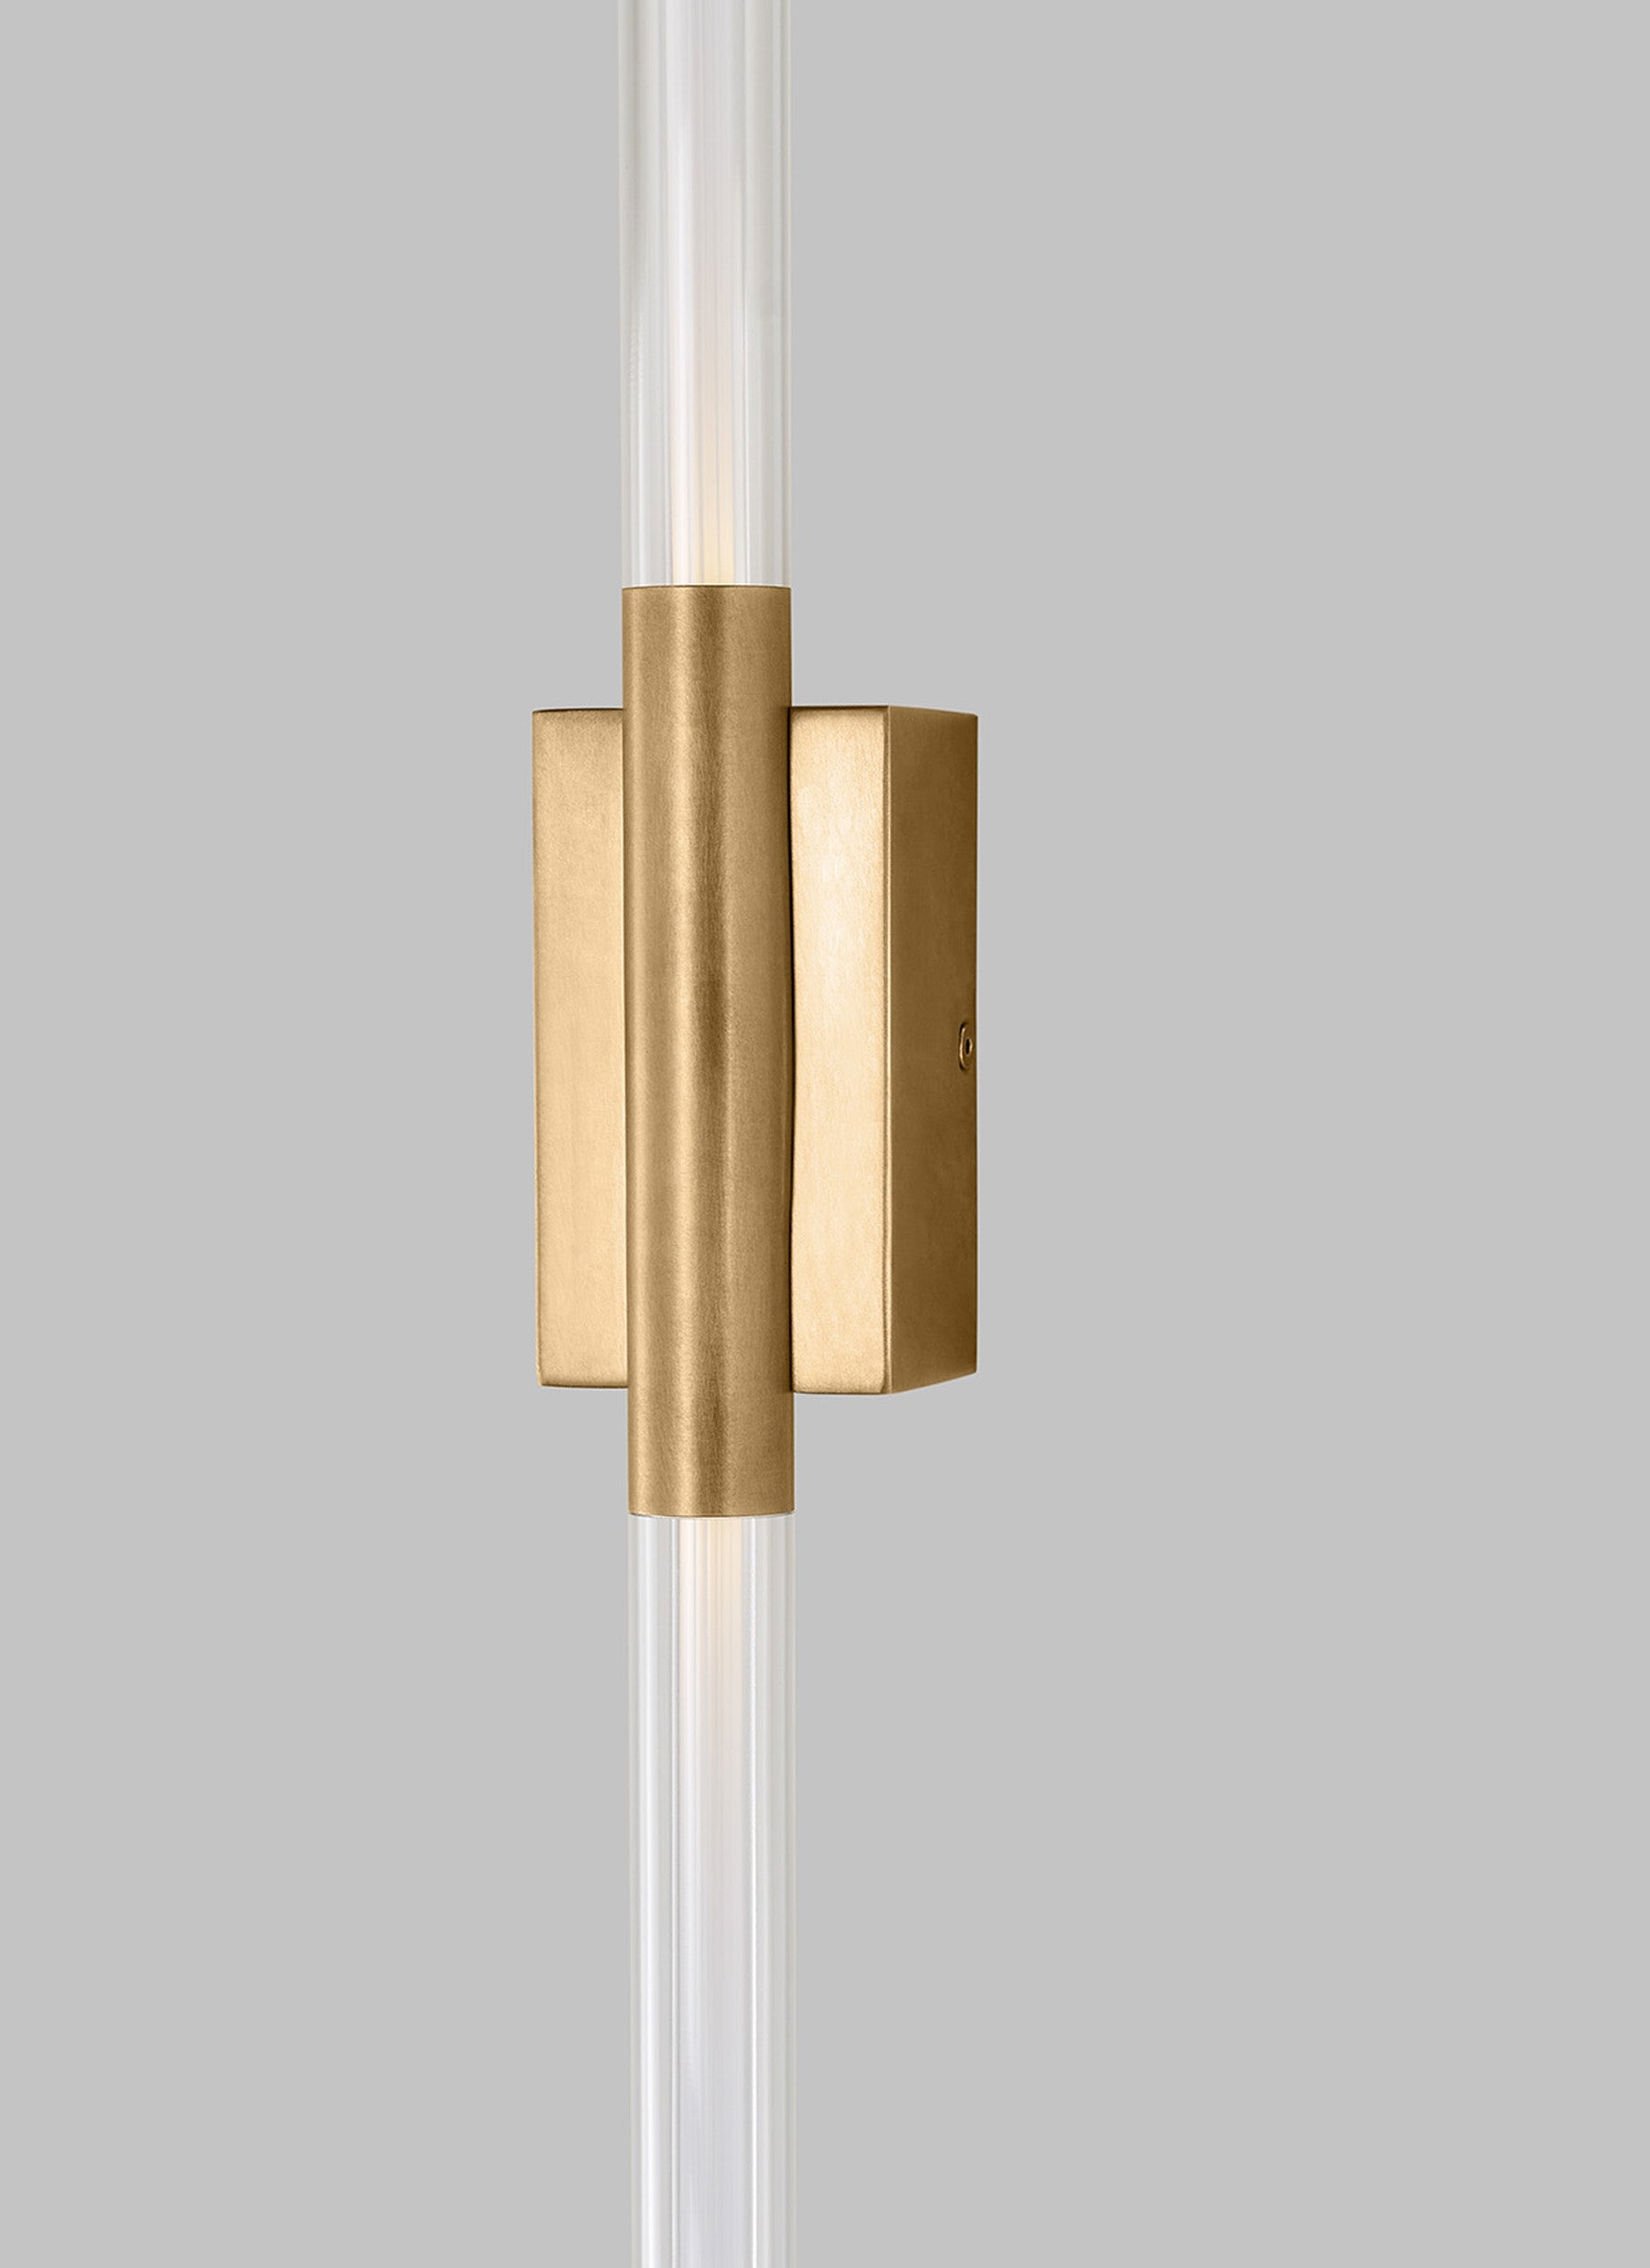 Phobos Wall Sconce - Enhancing Home Interiors with Light